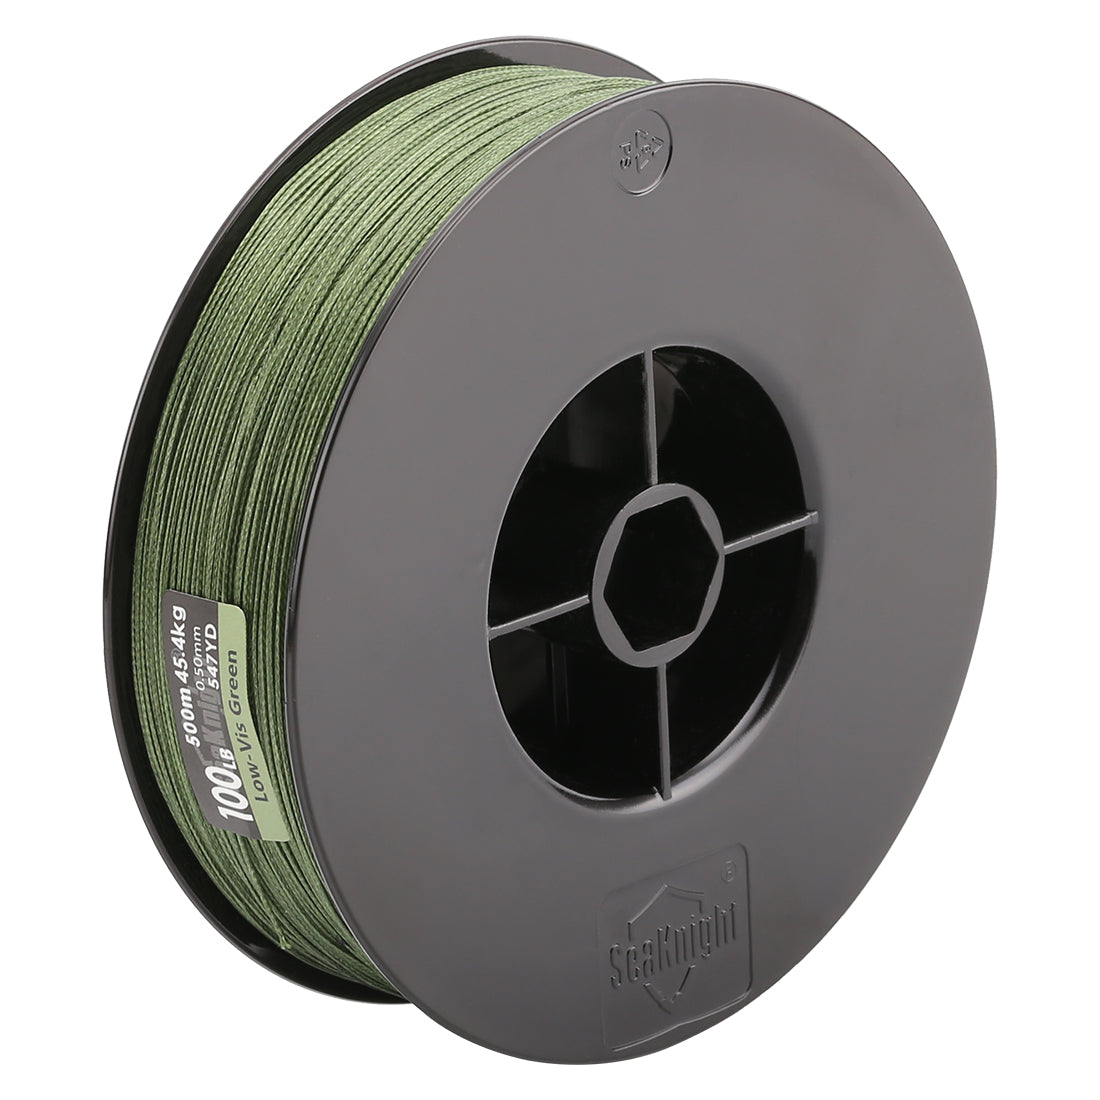 SeaKnight 500M/546YDS MONSTER W8 Braided Fishing Lines 8 Weaves Wire Smooth PE Multifilament Line 